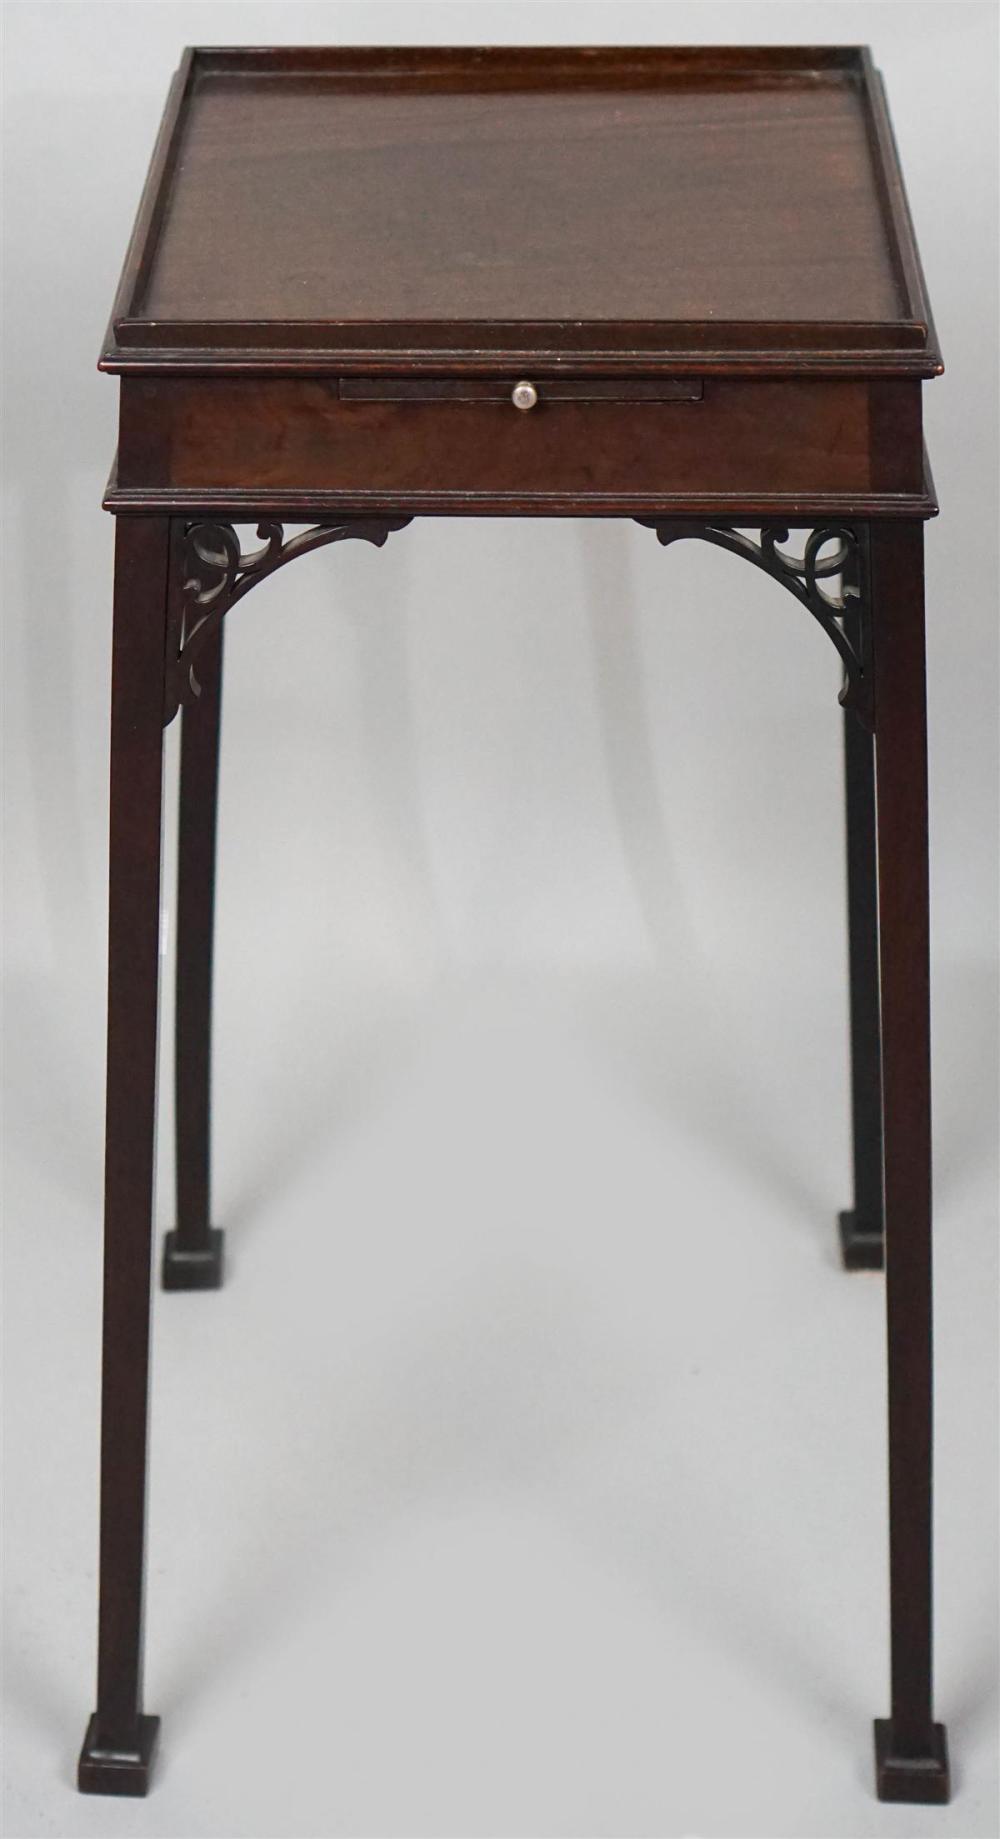 CHIPPENDALE STYLE MAHOGANY URN 312b06